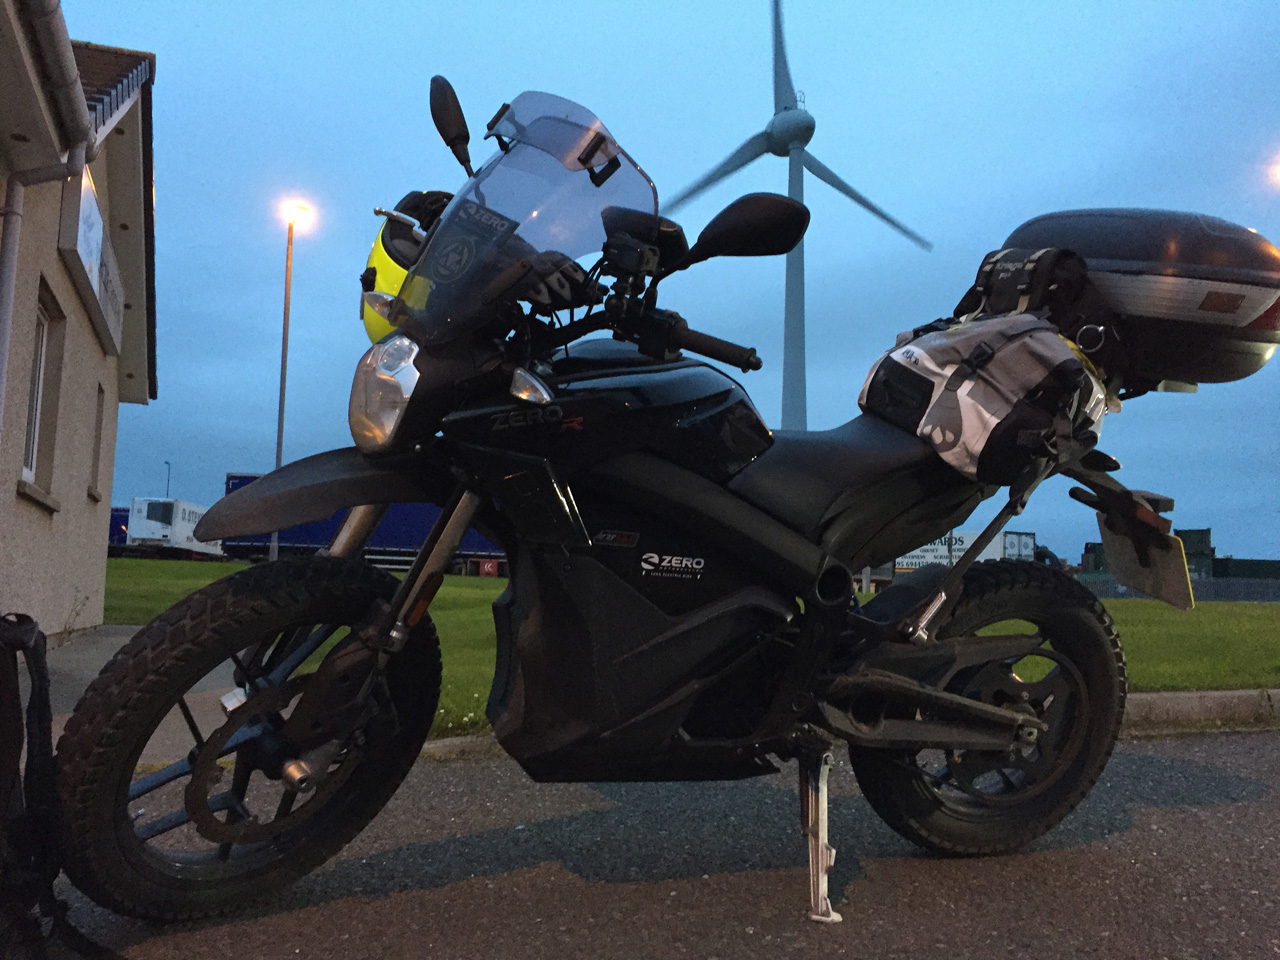 John Chivers' Zero DSR electric motorcycle at Hatston ferry terminal, Kirkwall, Orkney.